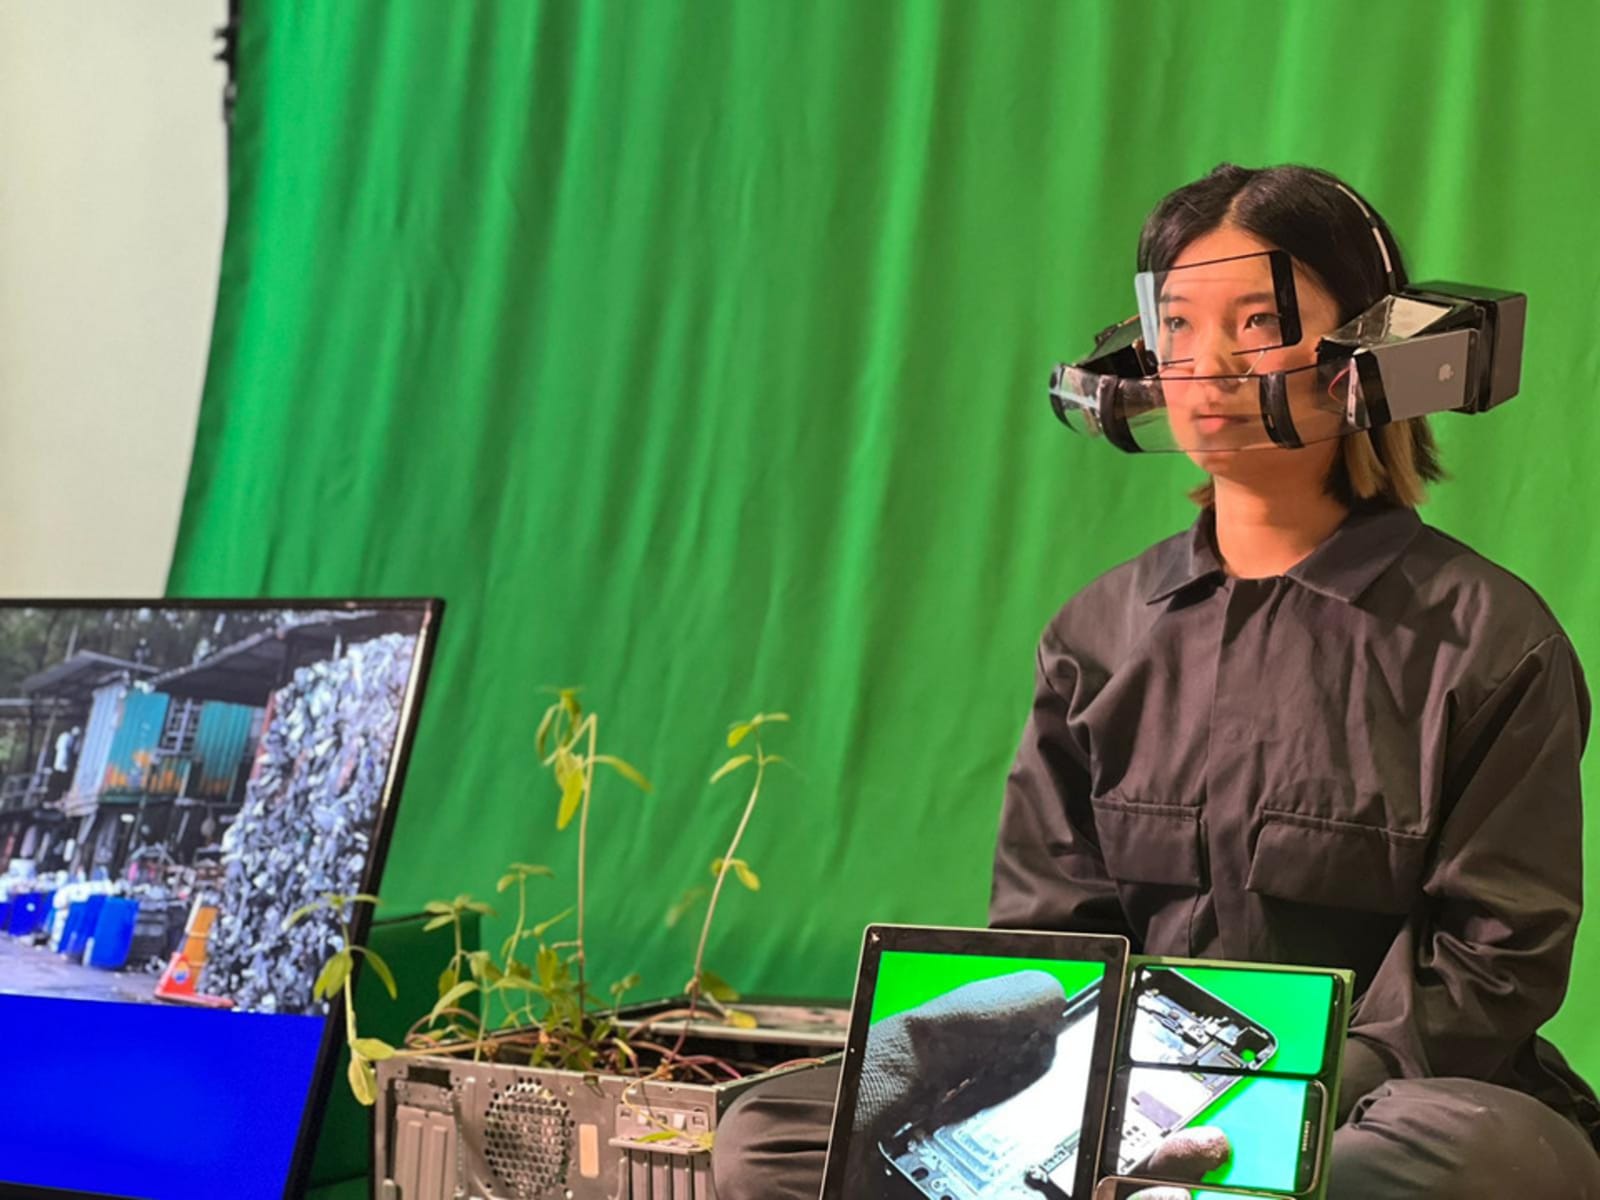 Image of student, wearing boiler suit and safety mask made out of salvaged technology, in studio setup with greenscreen backdrop